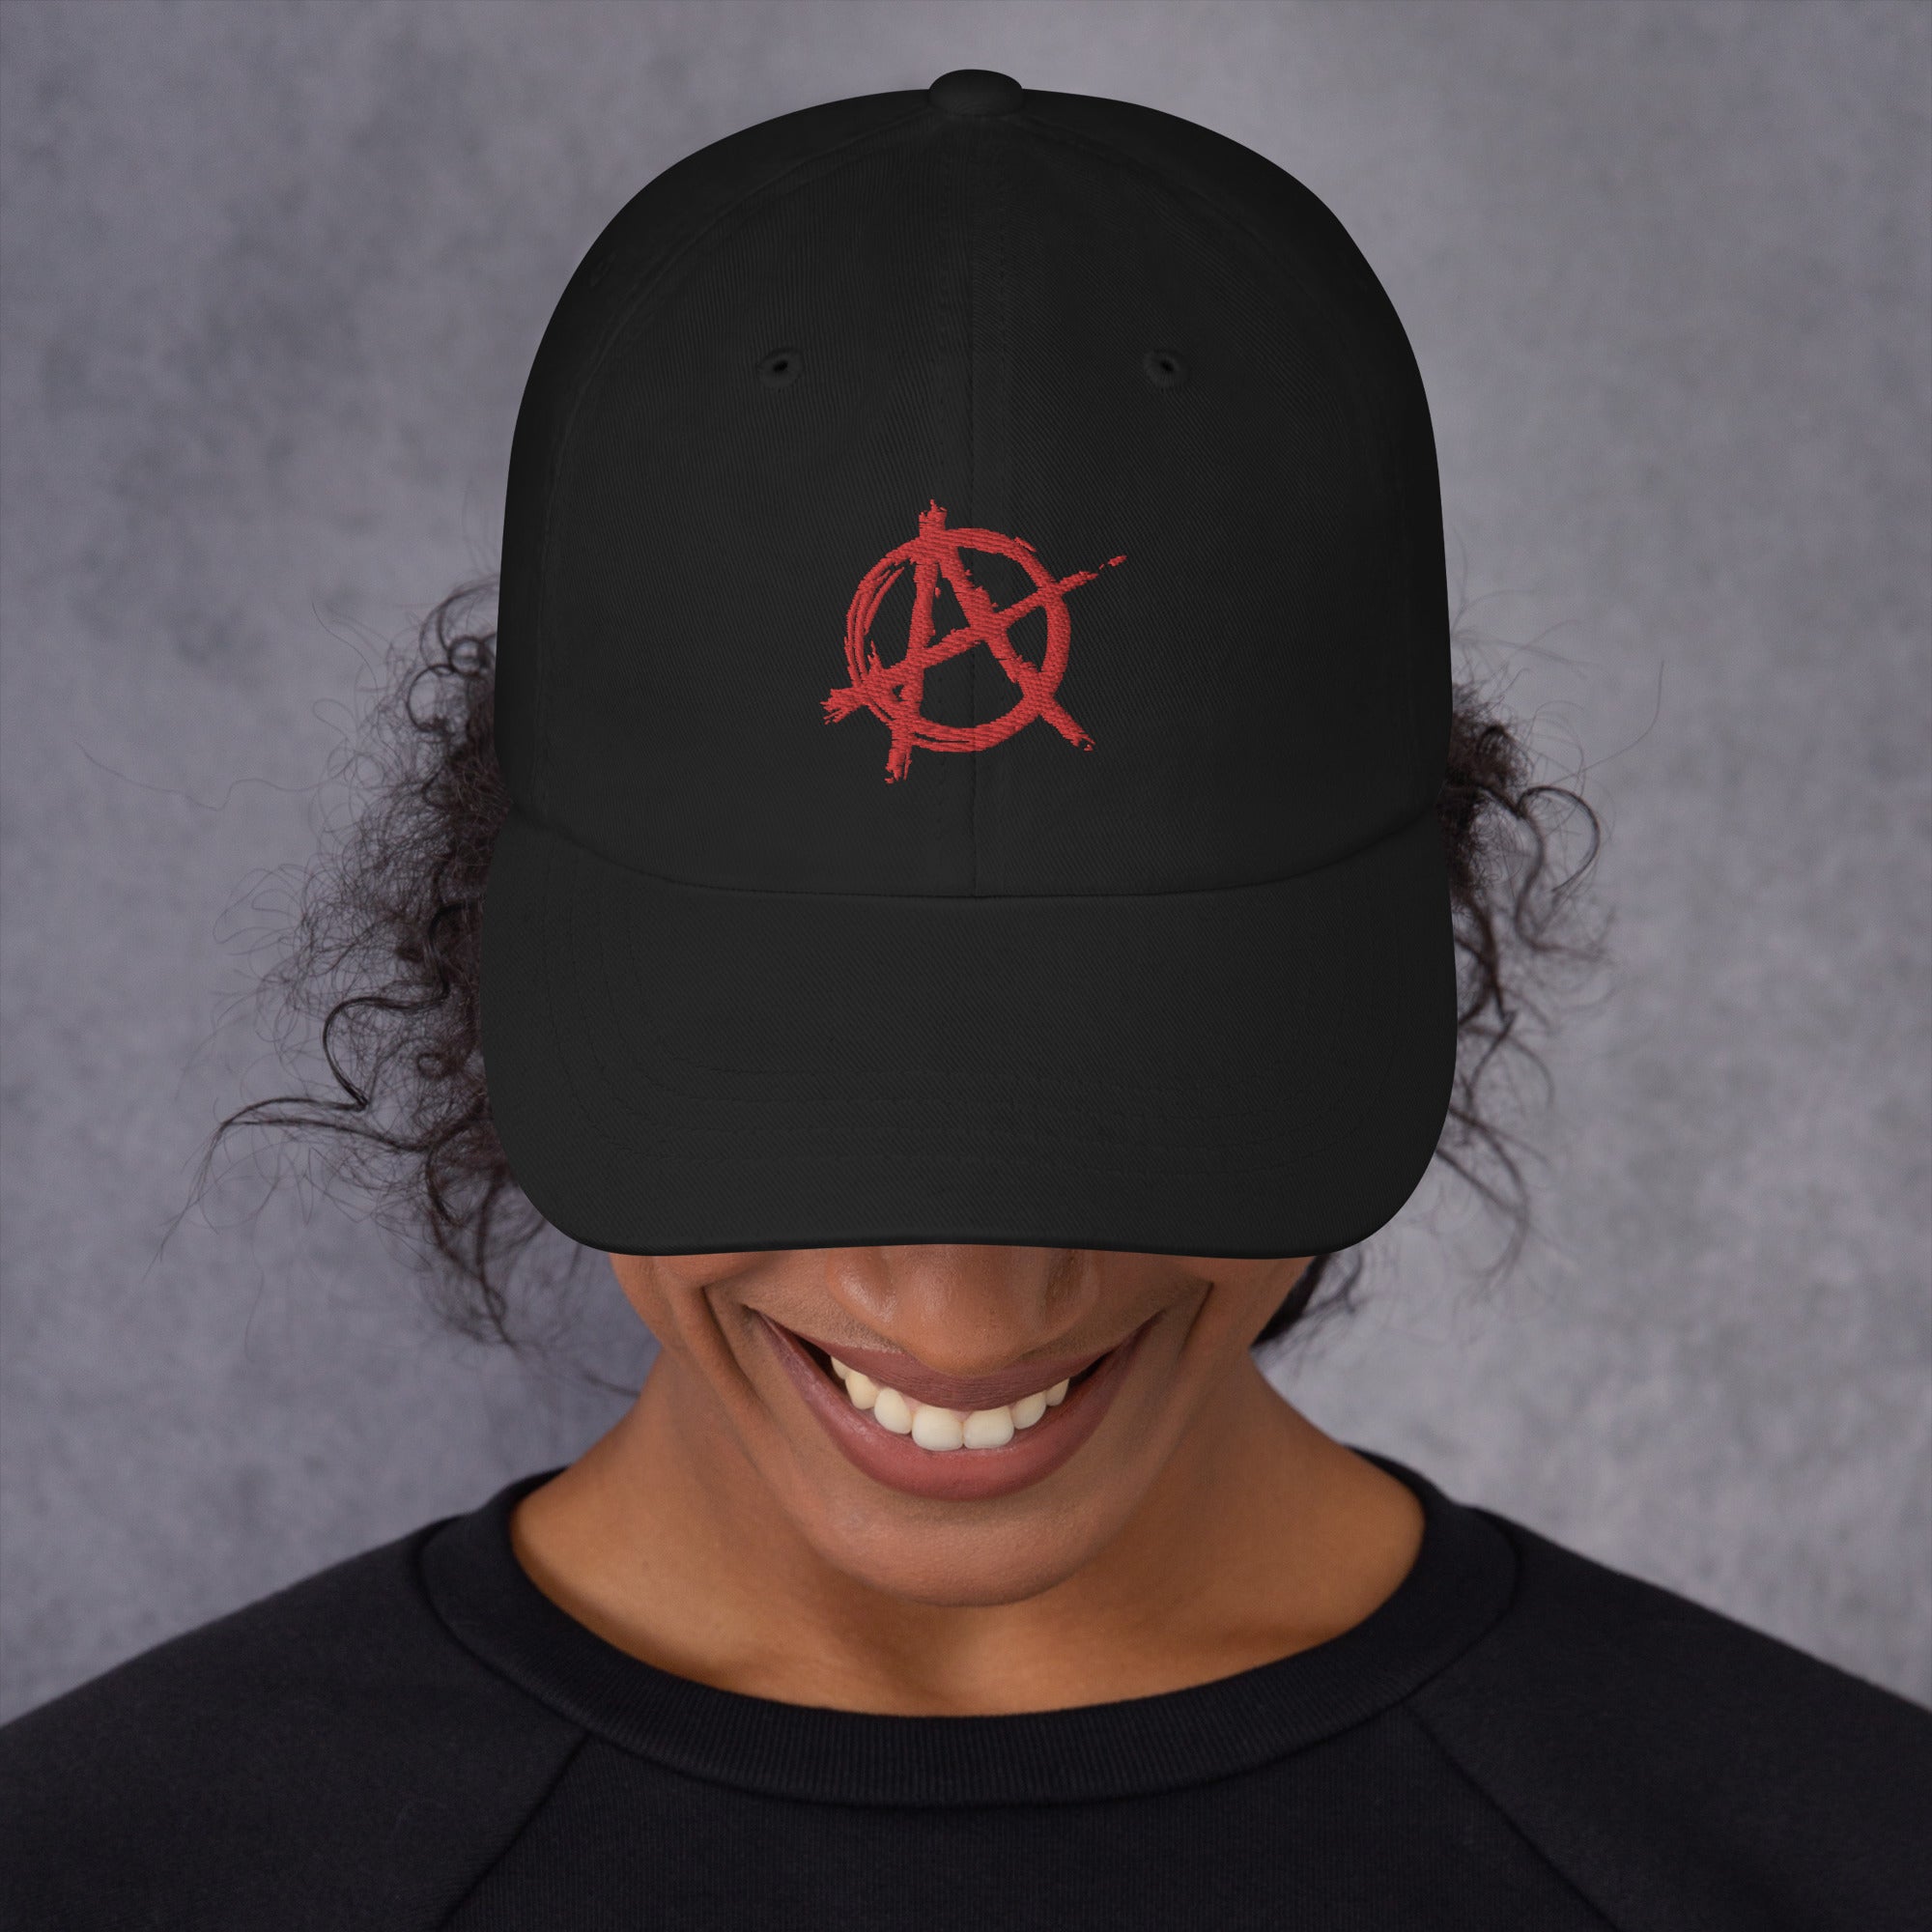 Anarchy Sign Punk Chaos and Rock n' Roll Embroidered Baseball Cap Dad hat Red Thread - Edge of Life Designs